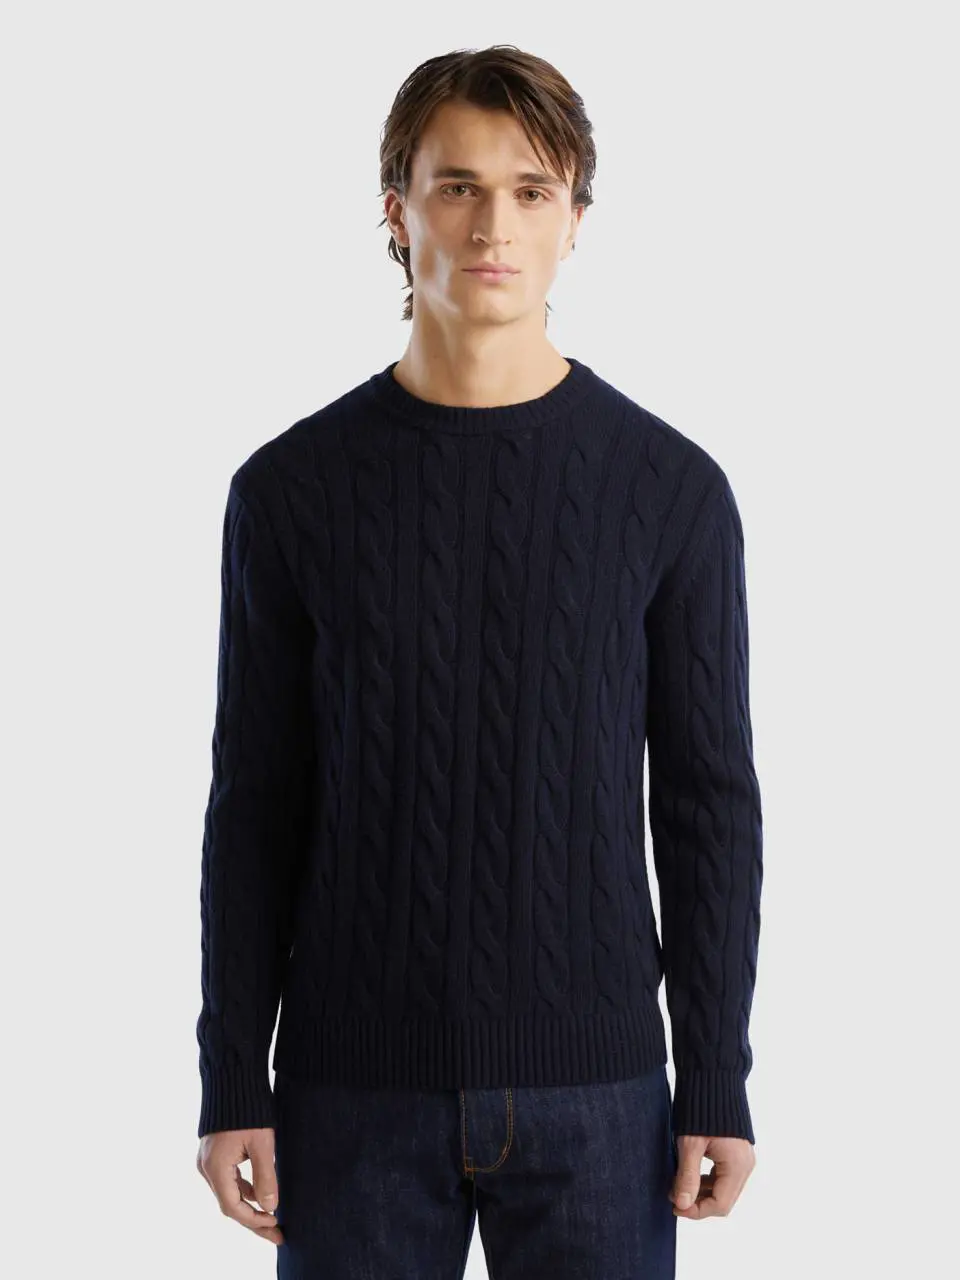 Benetton cable knit sweater in cashmere blend. 1